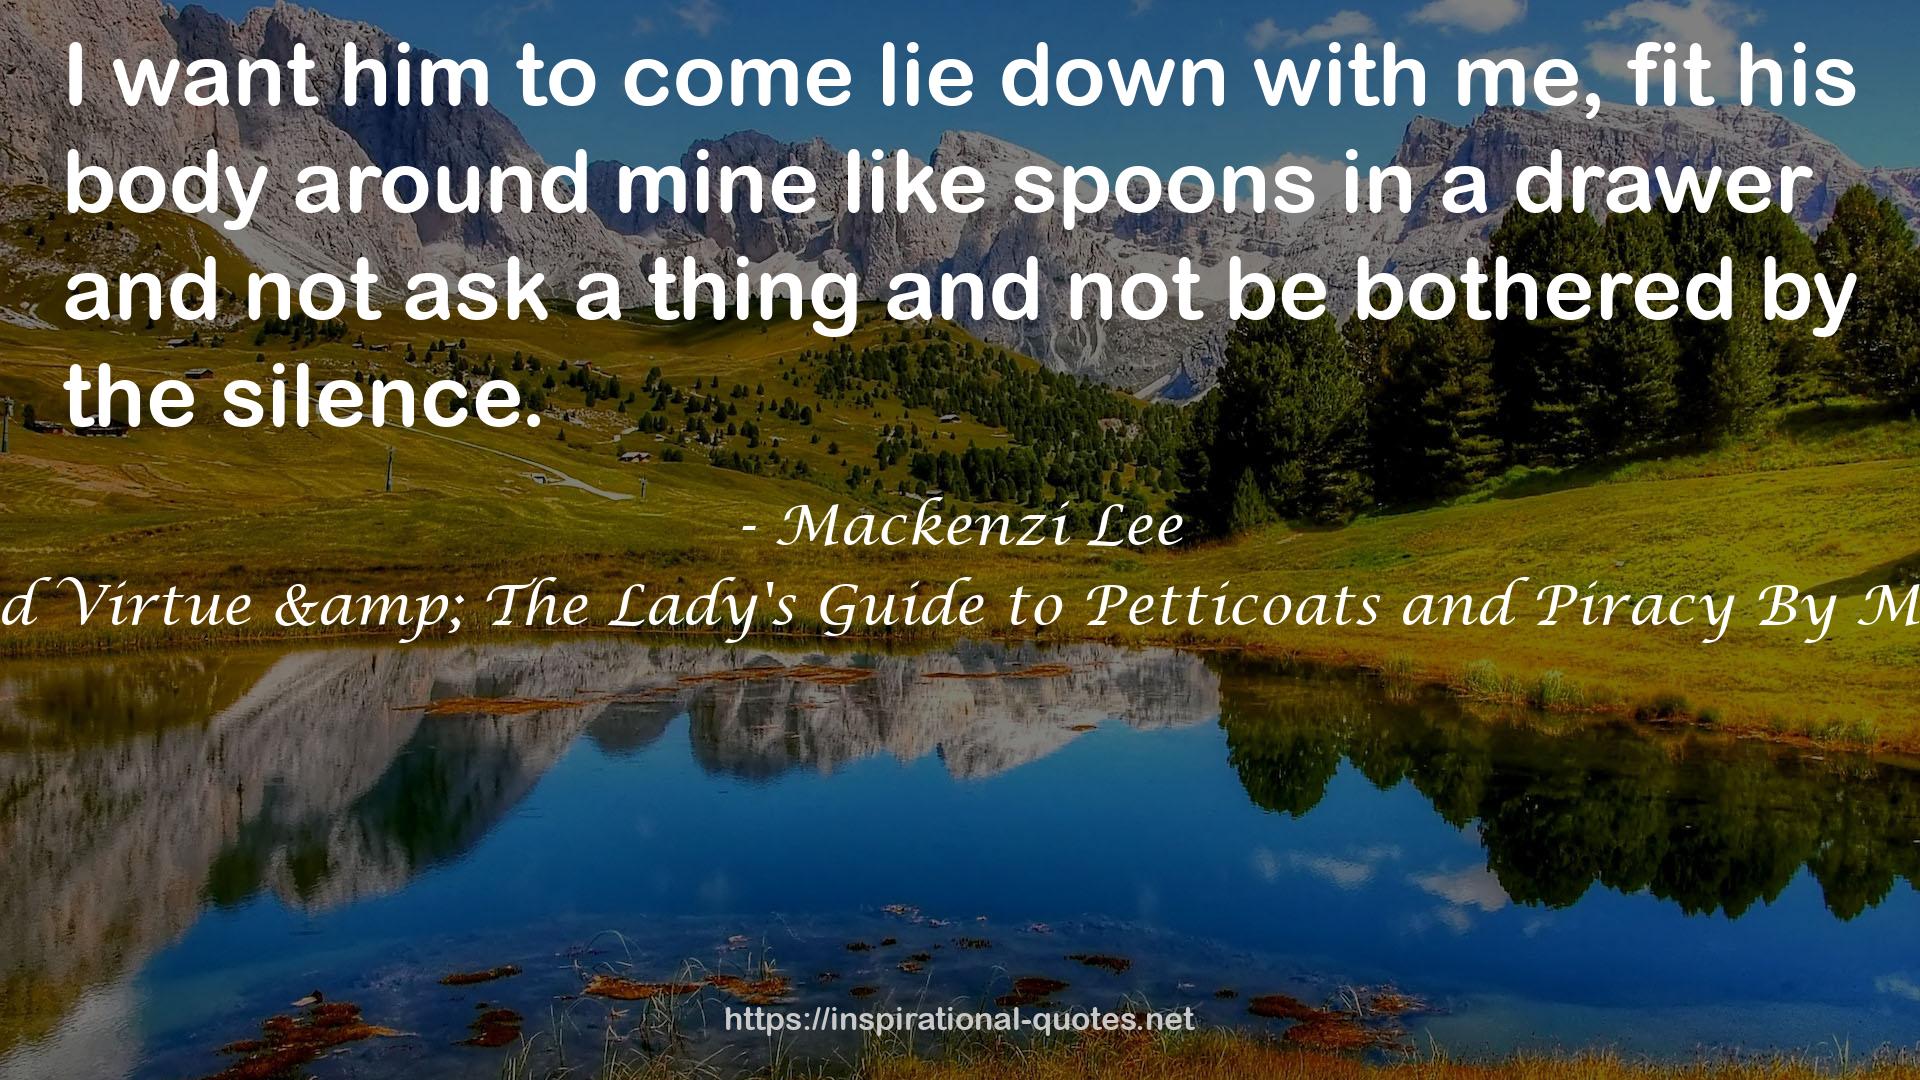 The Gentleman's Guide to Vice and Virtue & The Lady's Guide to Petticoats and Piracy By Mackenzi Lee 2 Books Collection Set QUOTES